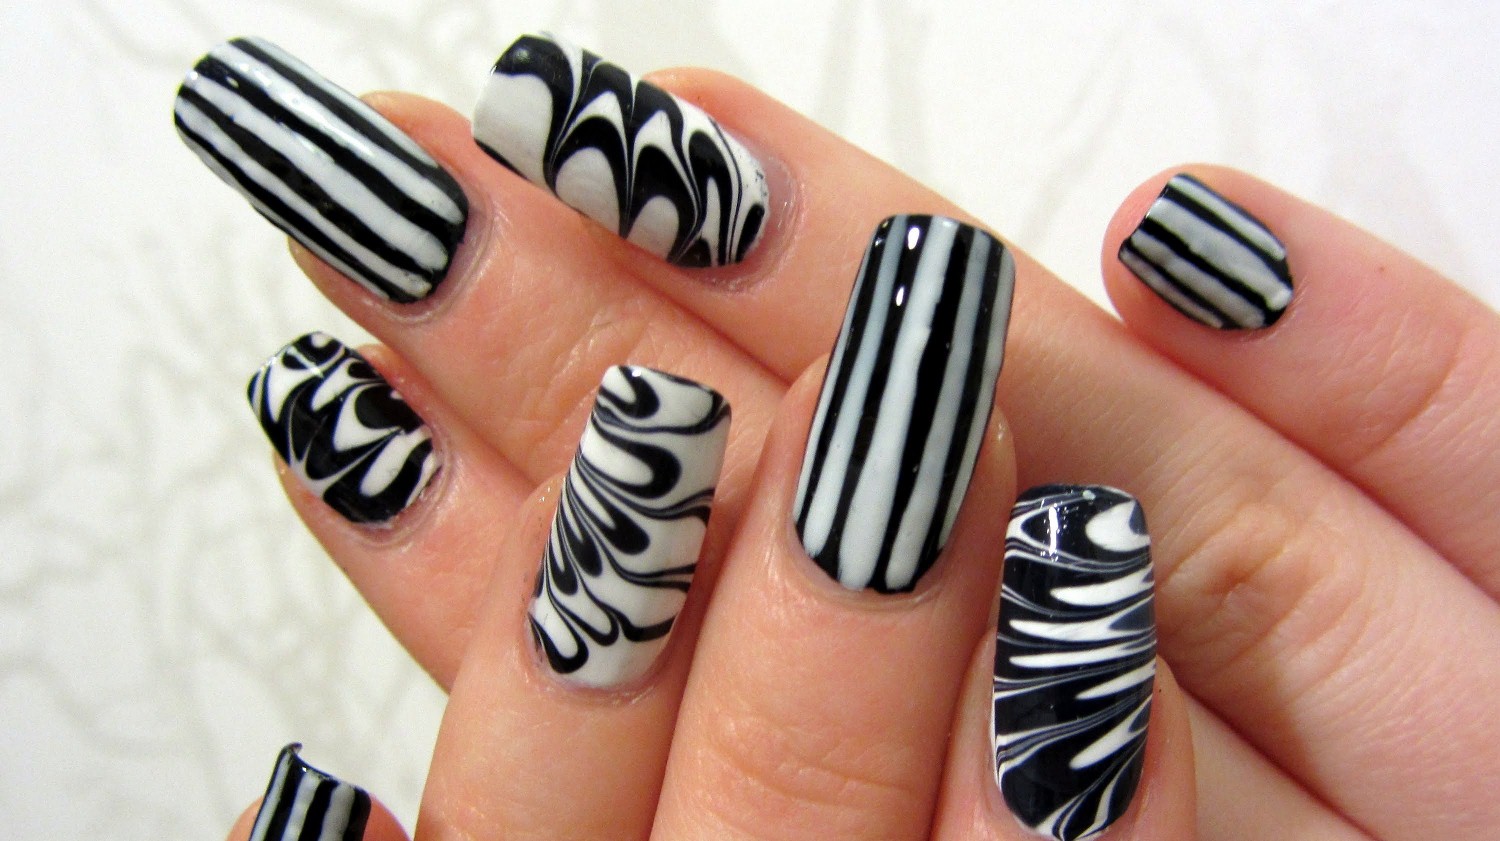 10. "Colorful Striped Nail Art Tutorial" - wide 3